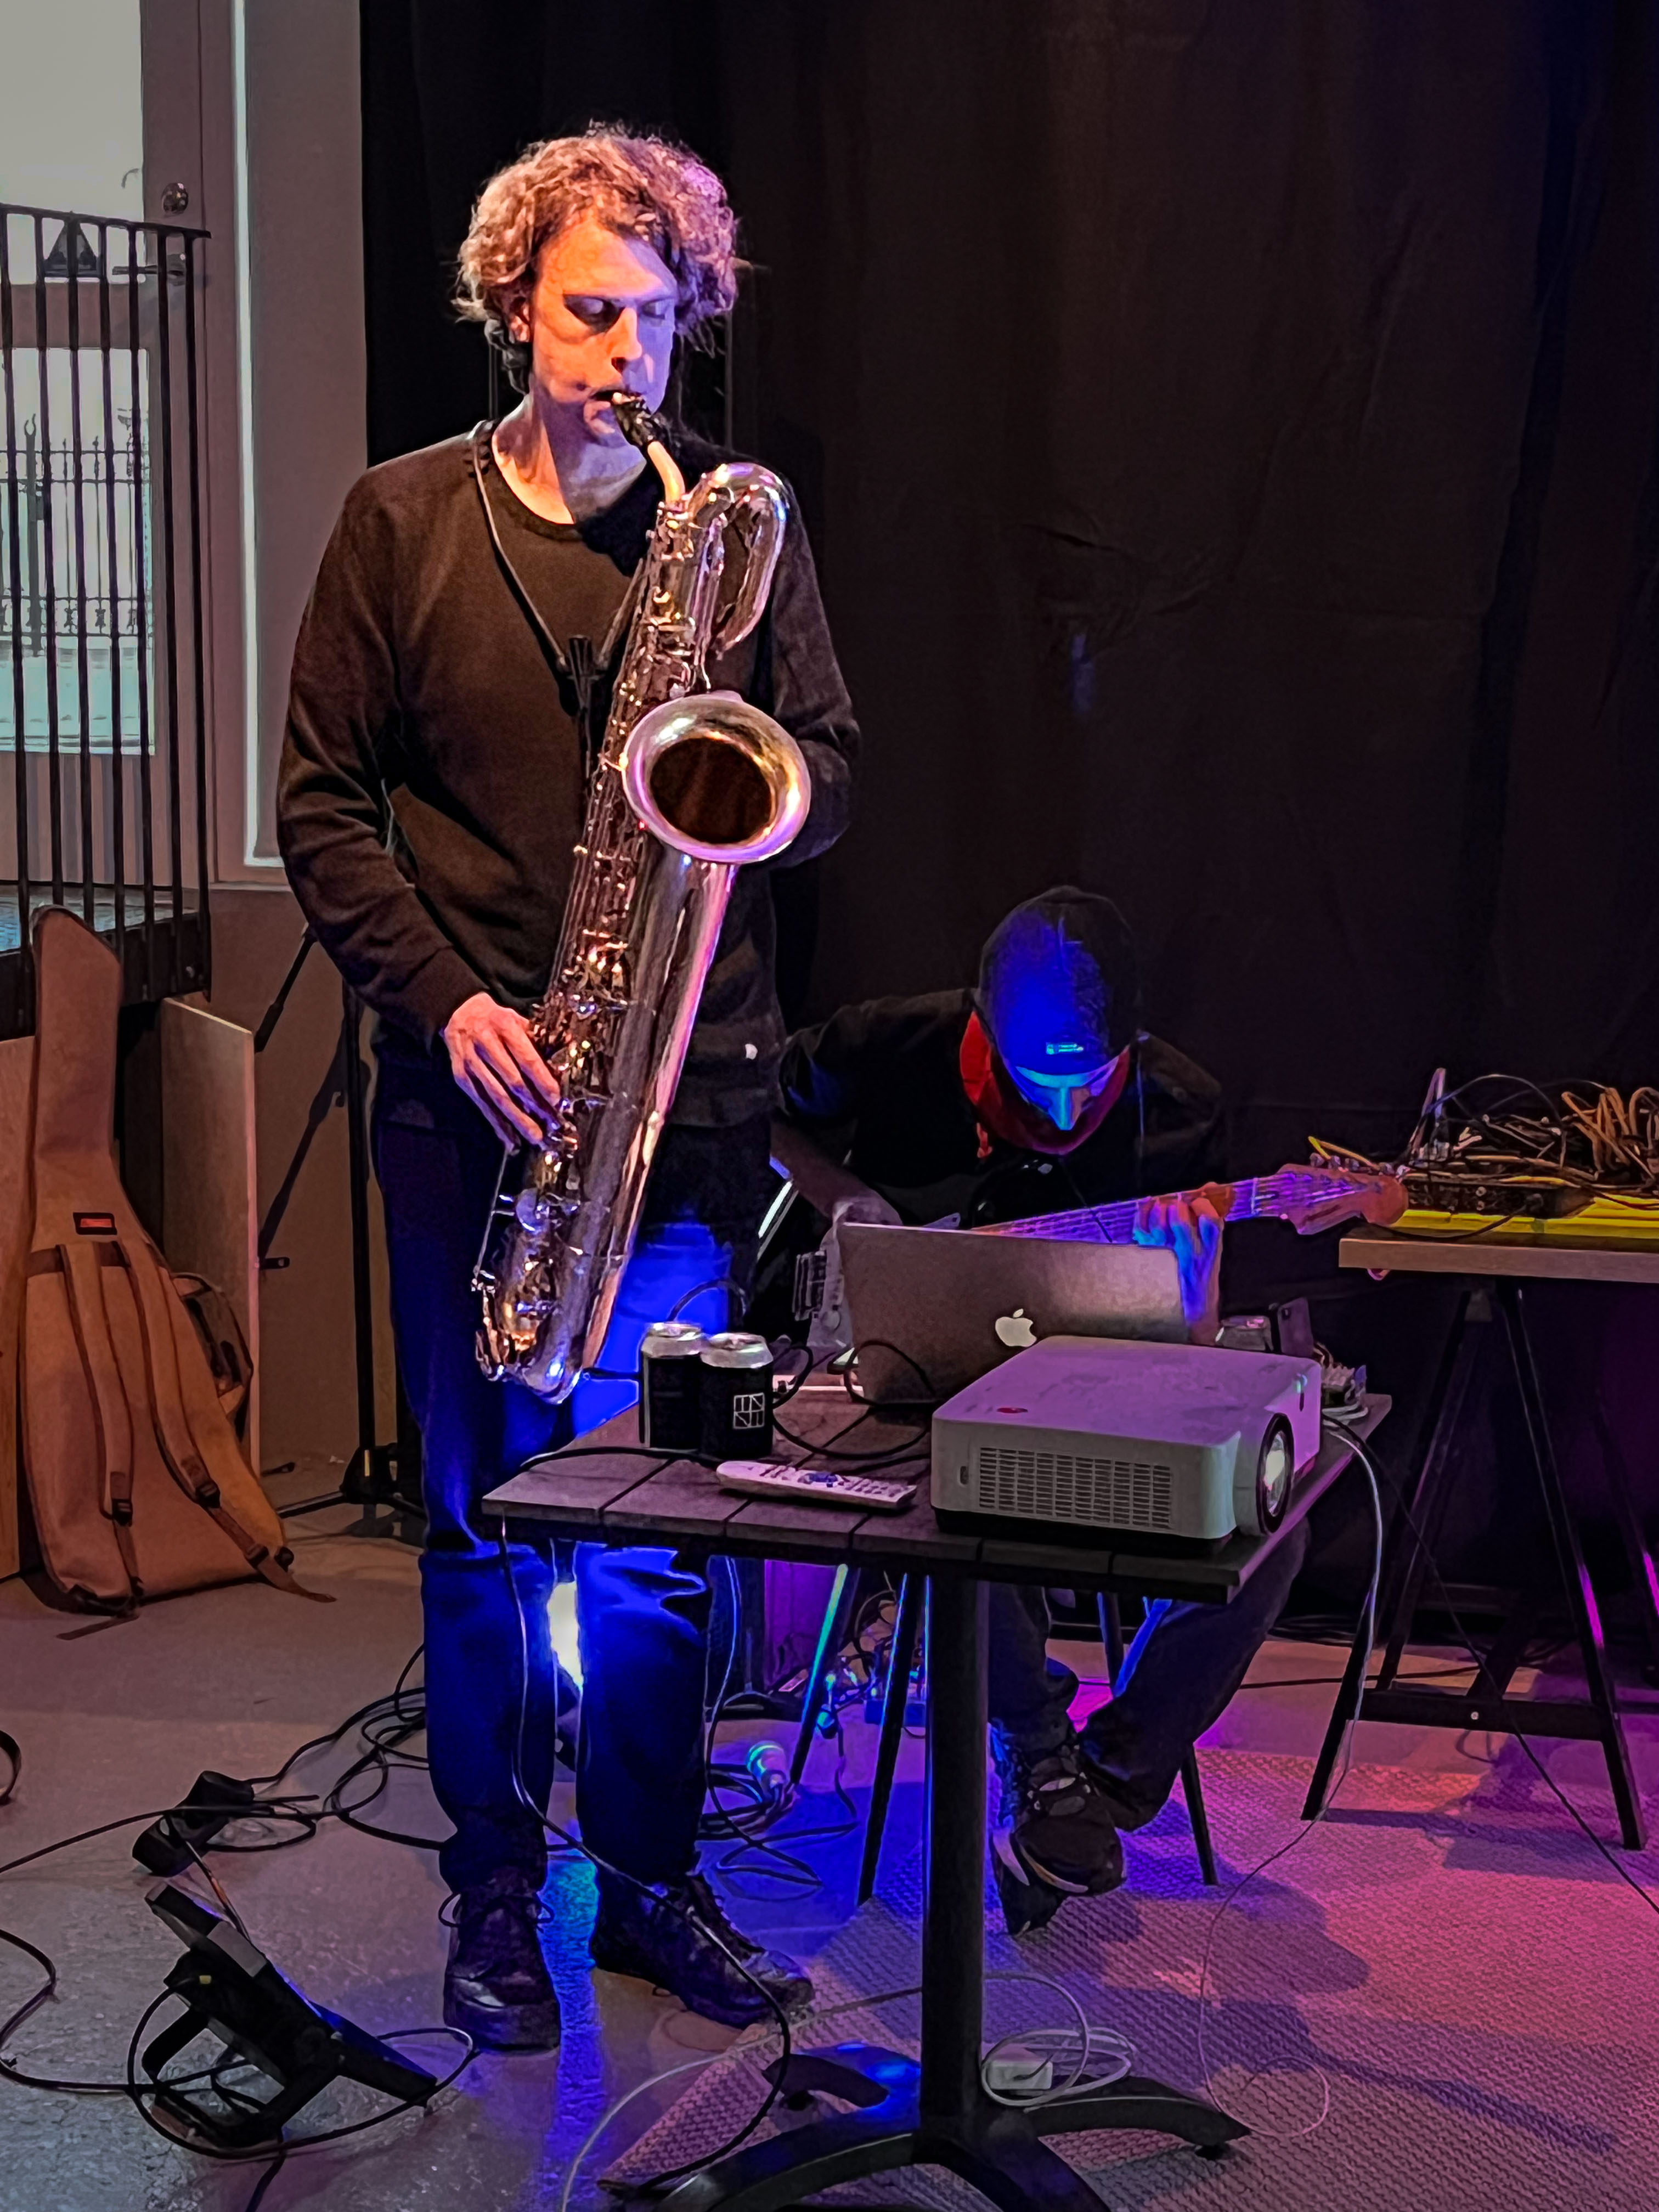 Two men playing music together, one standing with a saxaphone and a headband, the other one sitting in front of a laptop with an electric guitar.